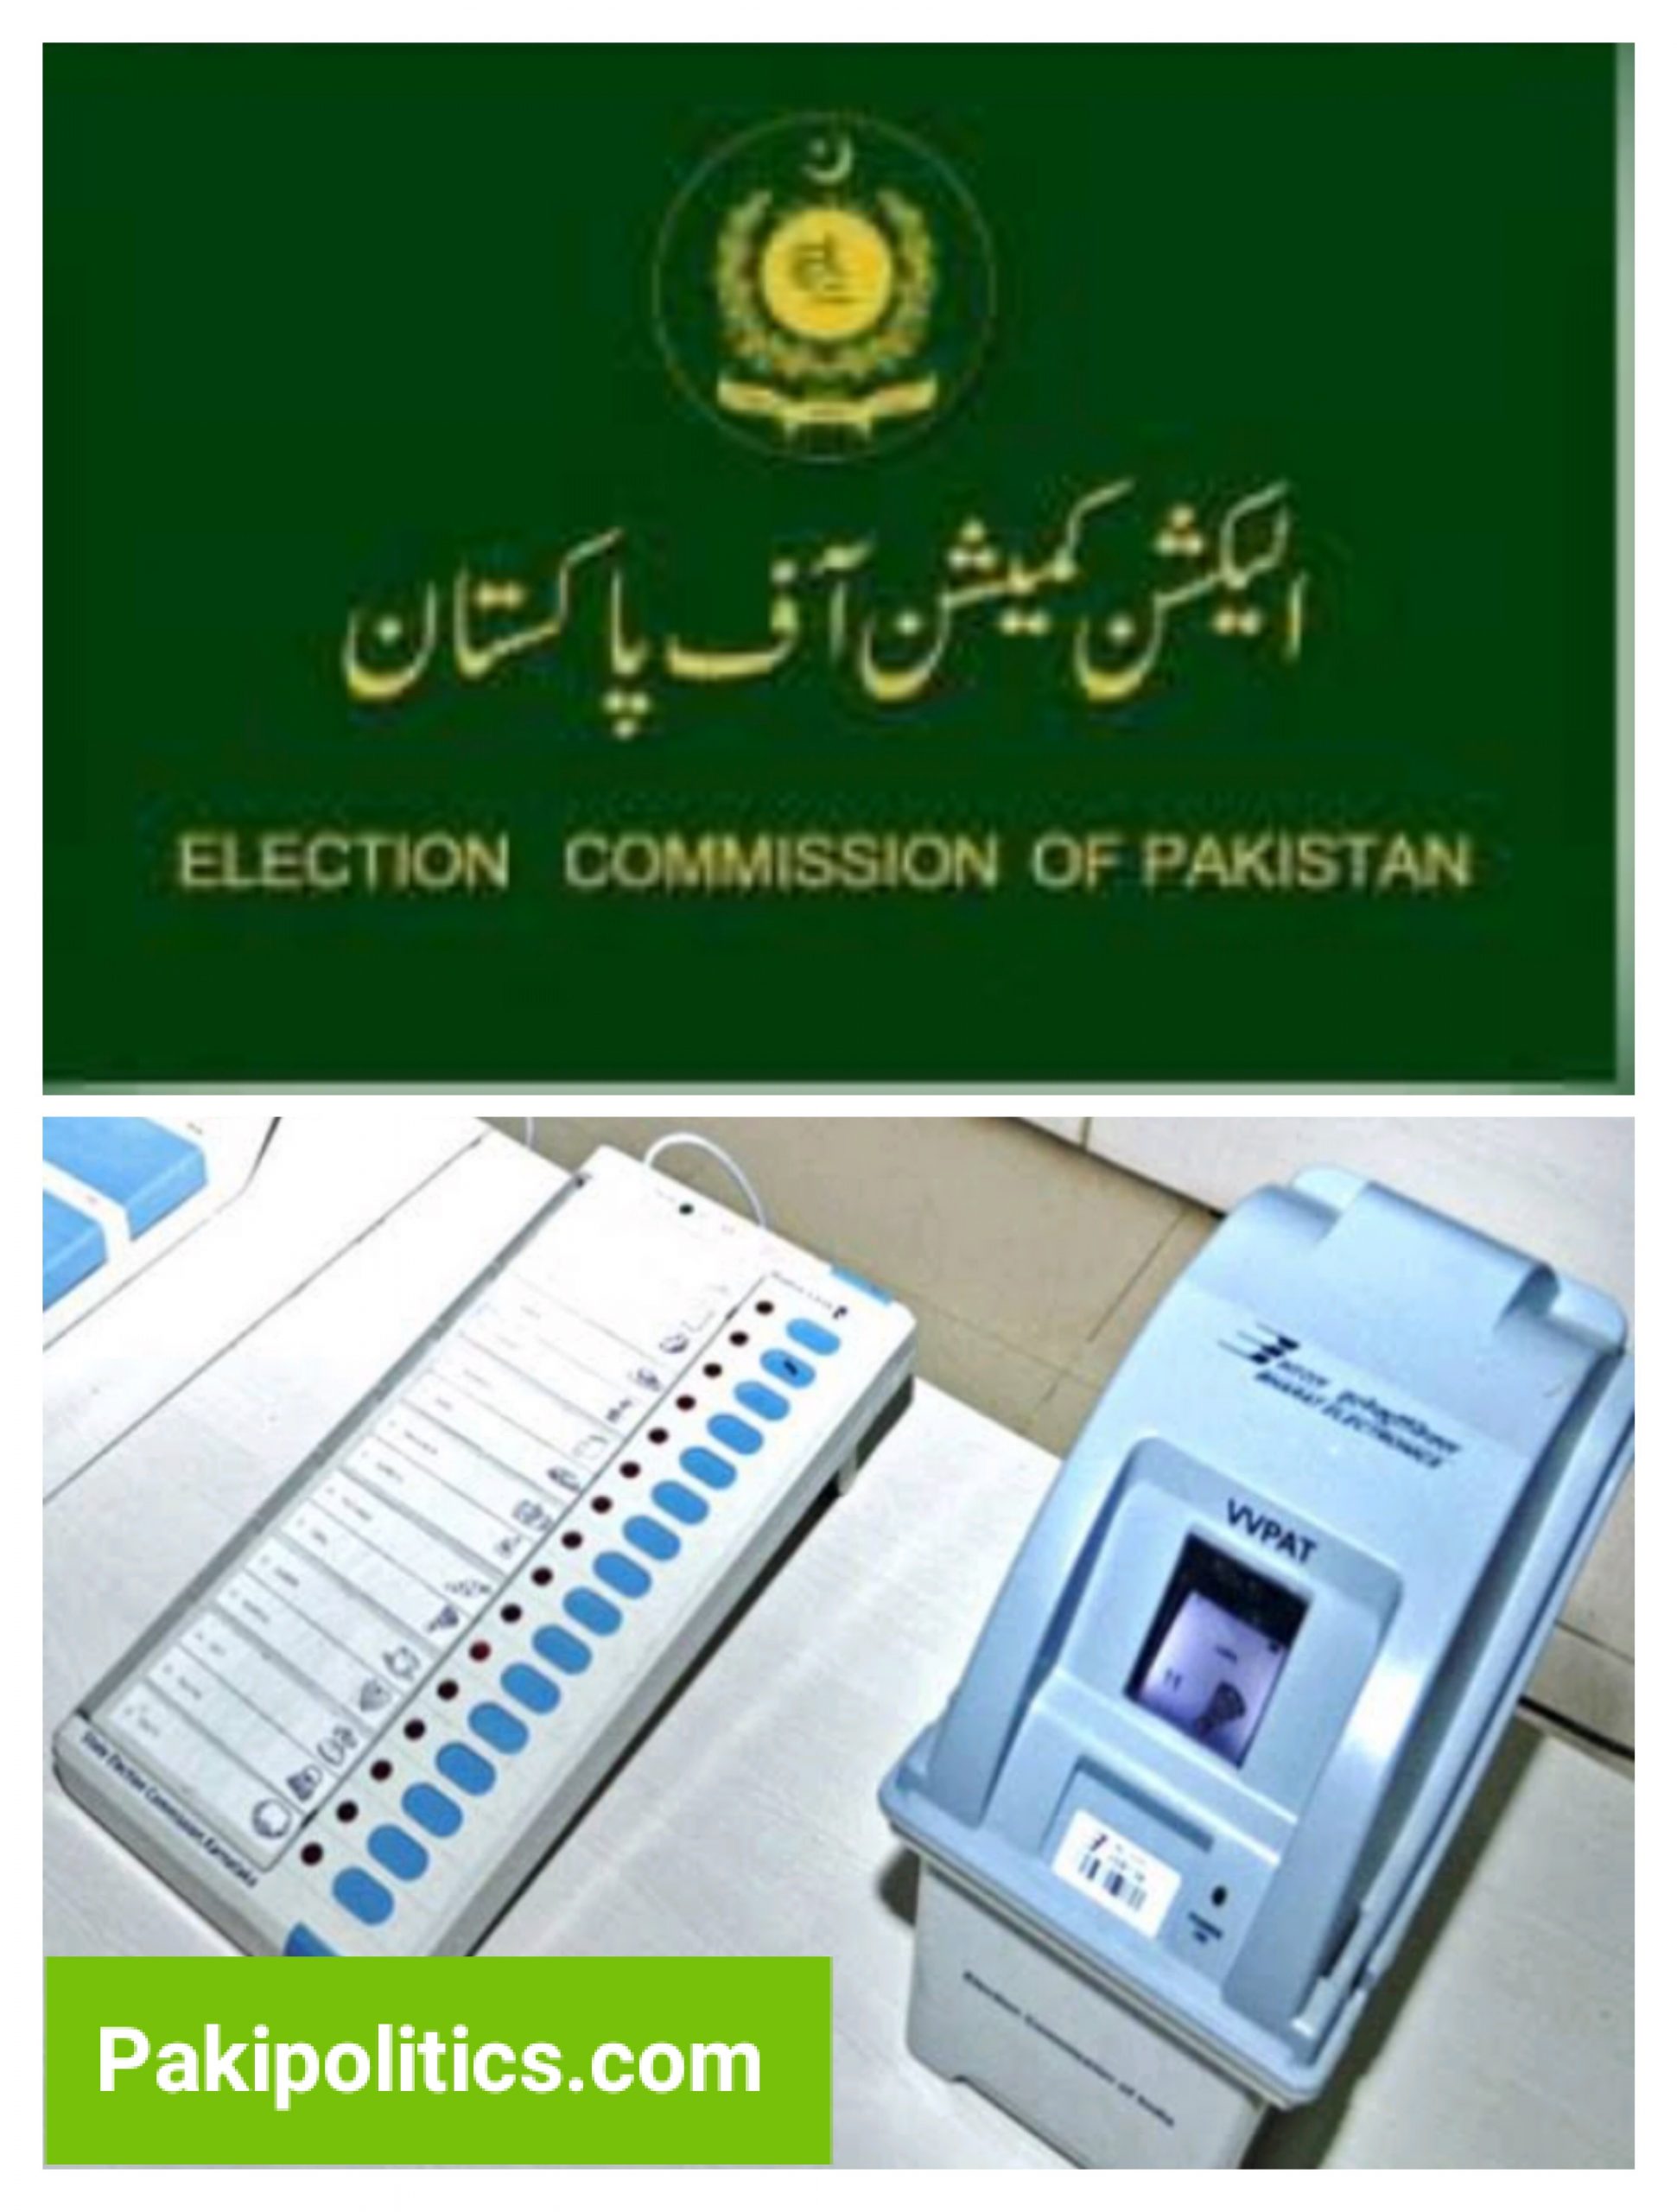 ECP decides to experiment with electronic voting machine in local body elections.